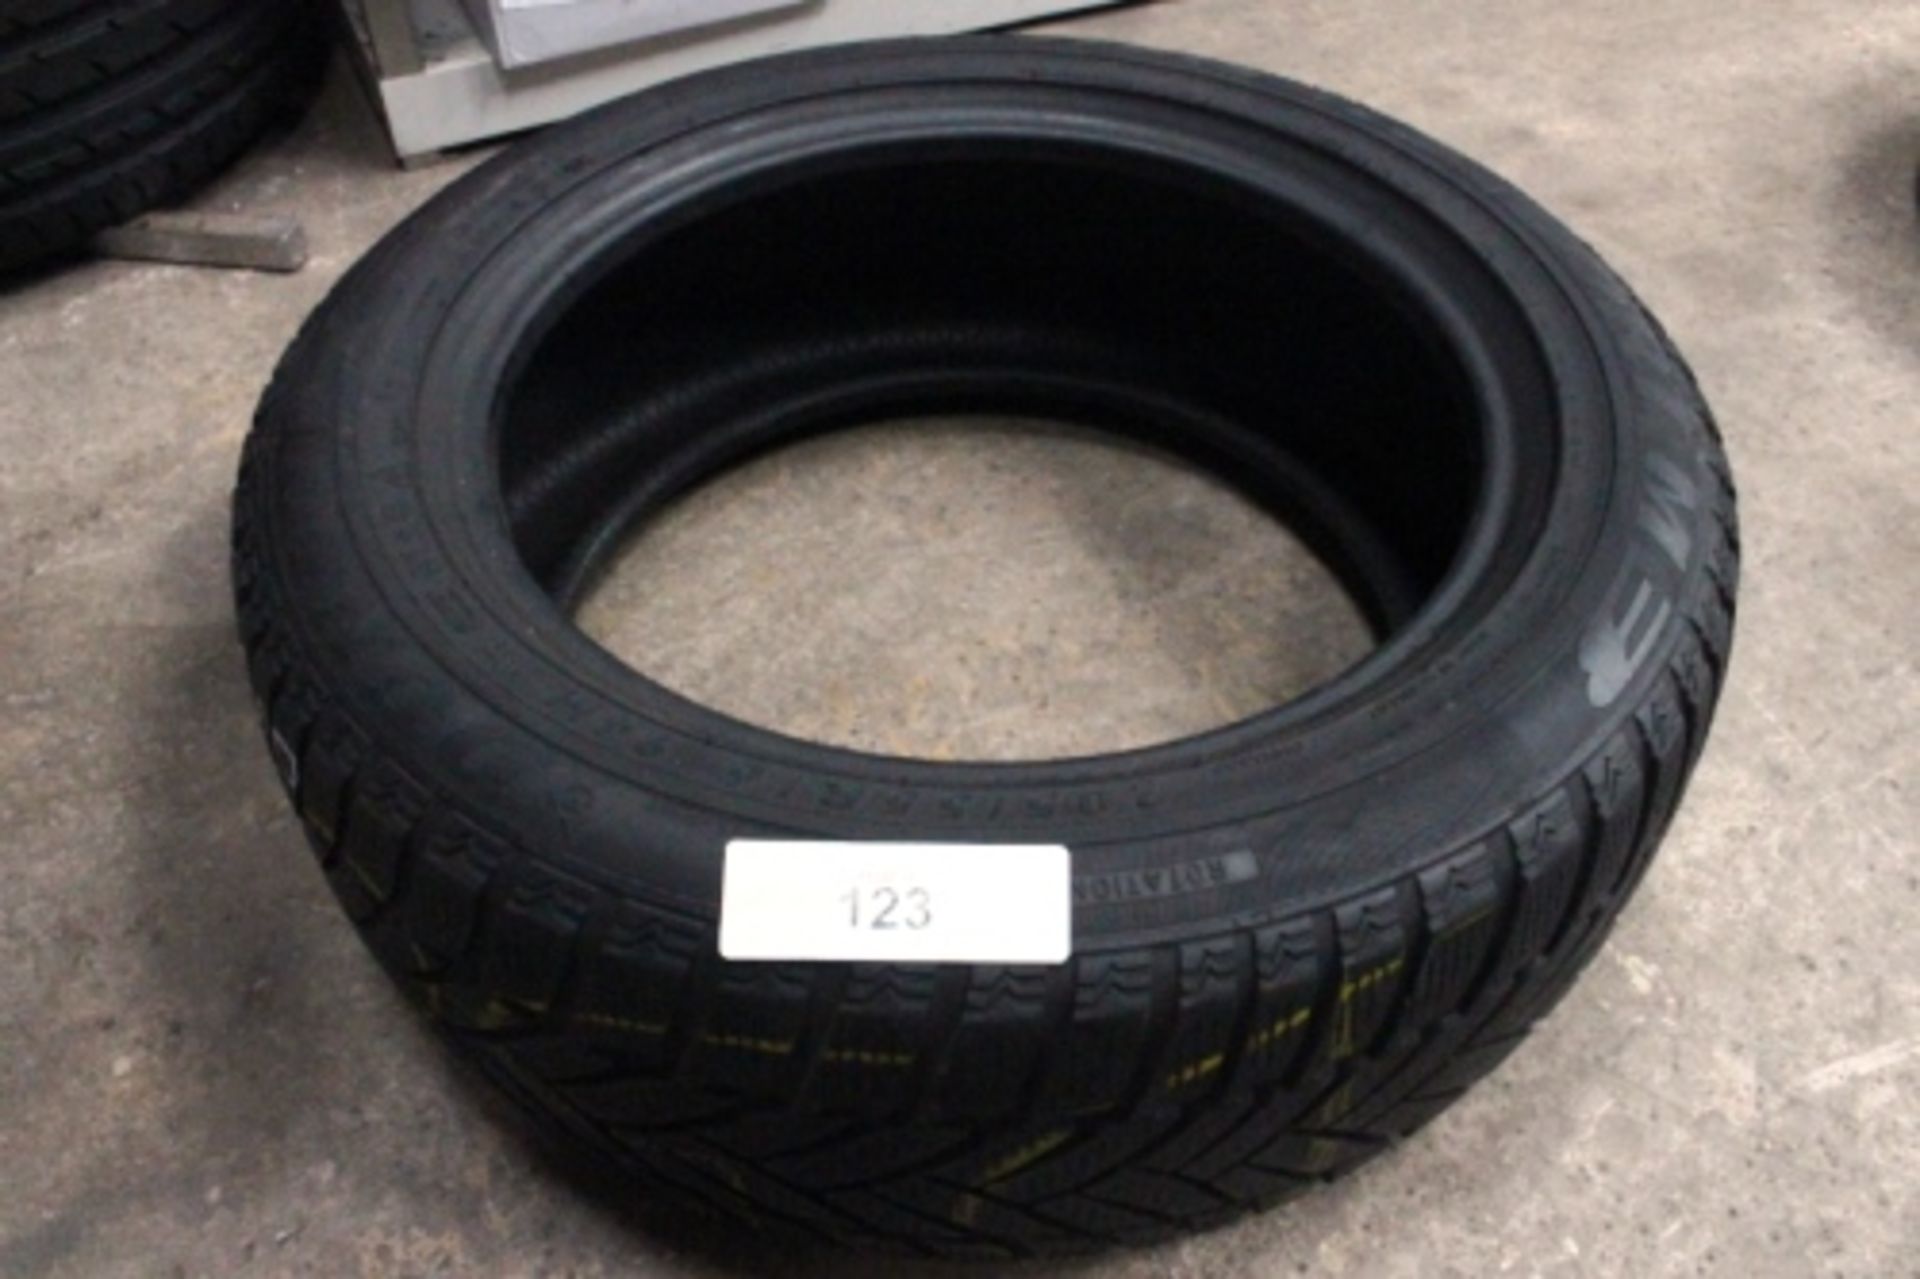 1 x Dunlop road tyre, size 205/55 R16 91H, tread remaining 5mm - Second-hand (ESB7)